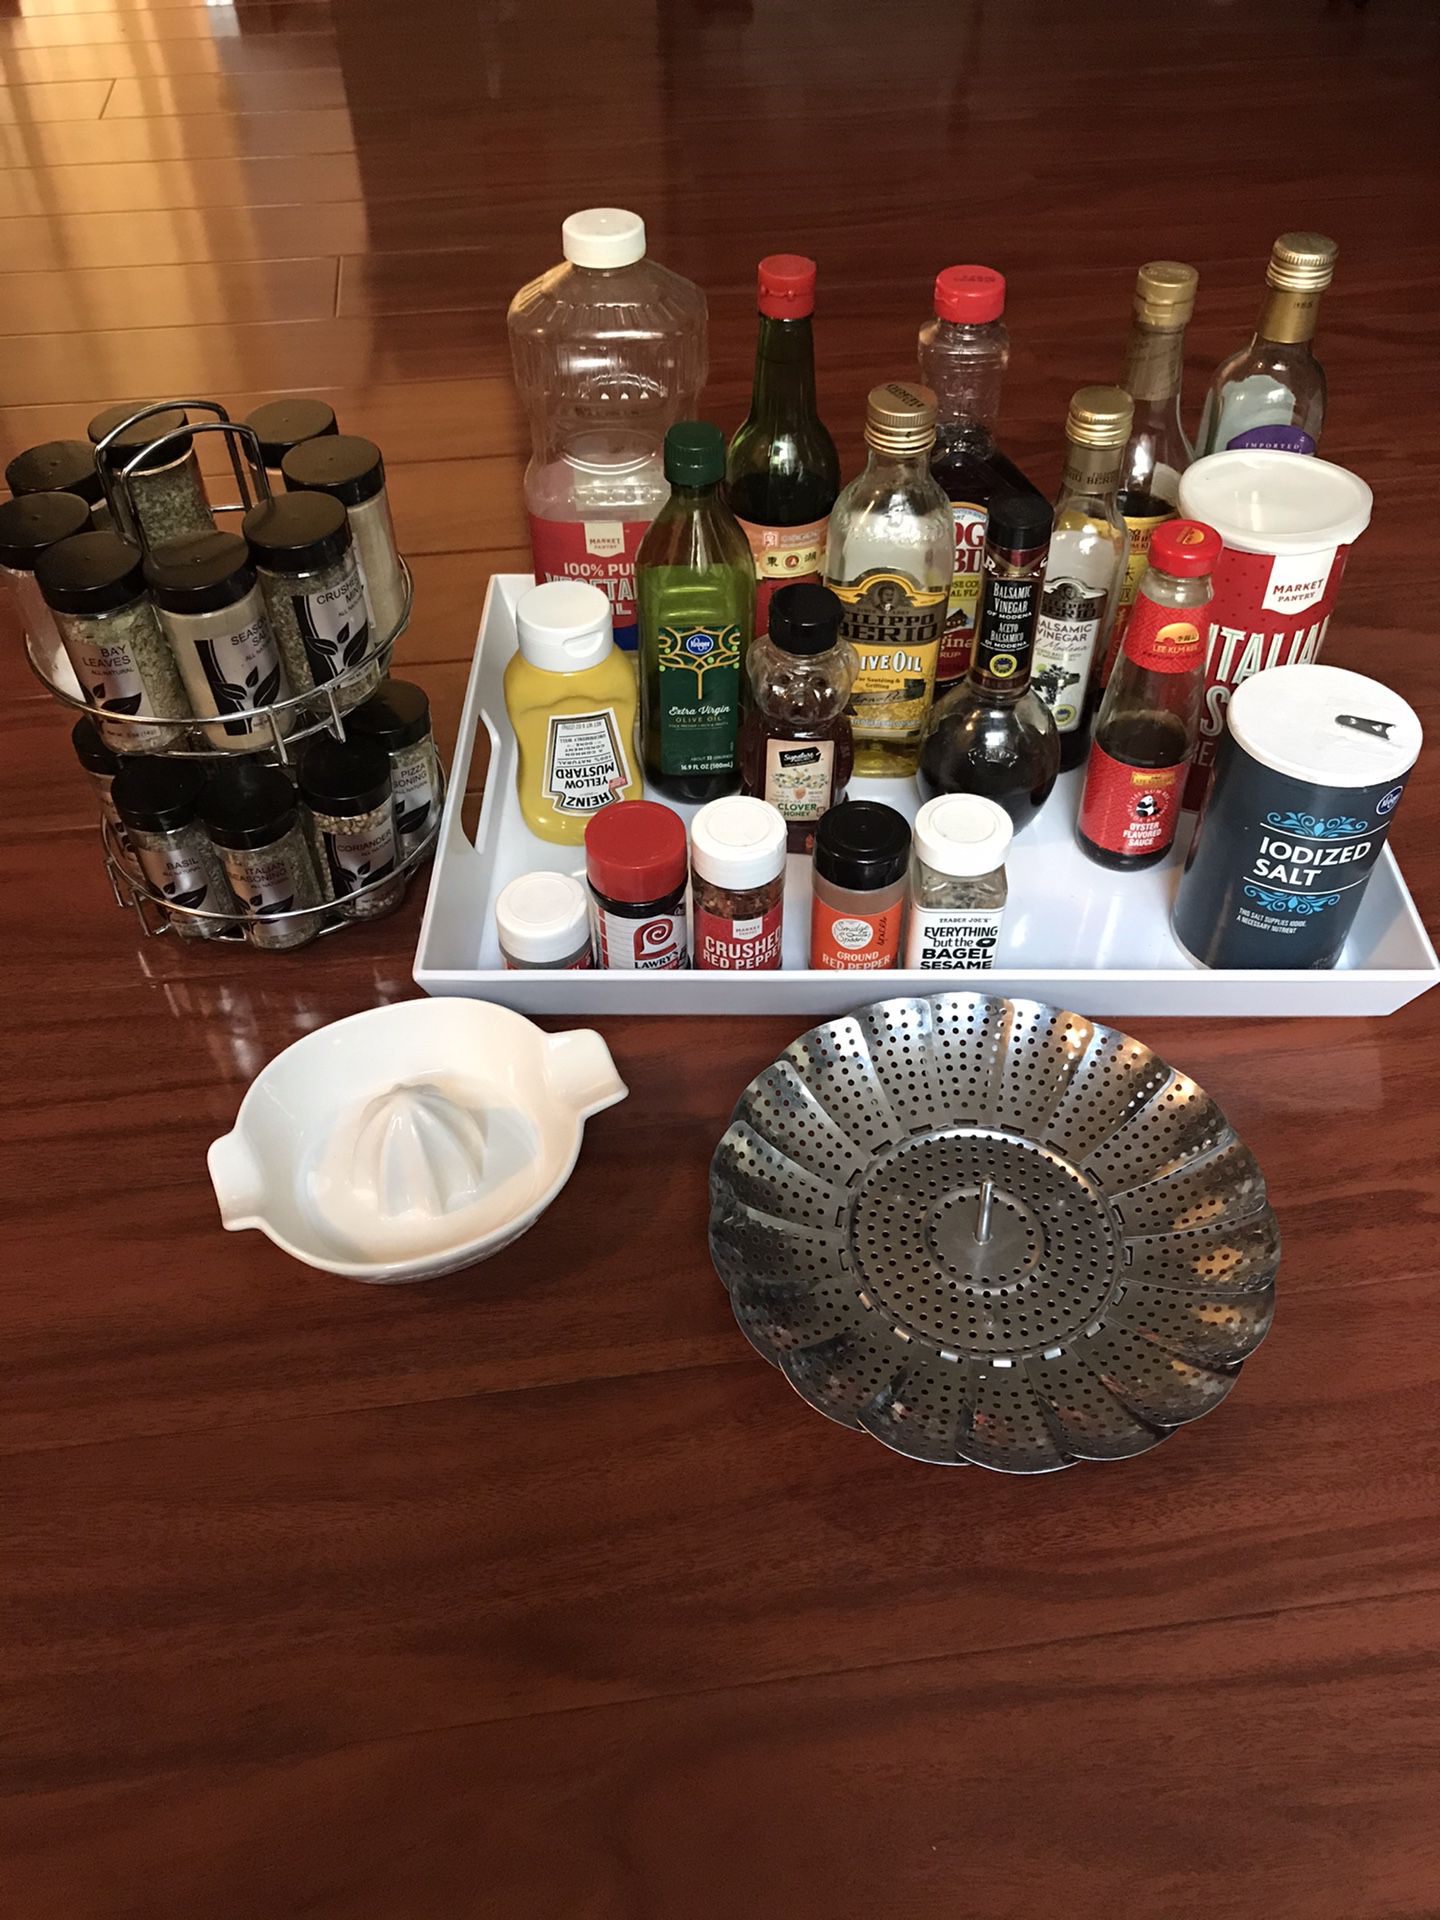 Kitchen goods: spice rack, veggie steamer, lemonade, white container with condiments